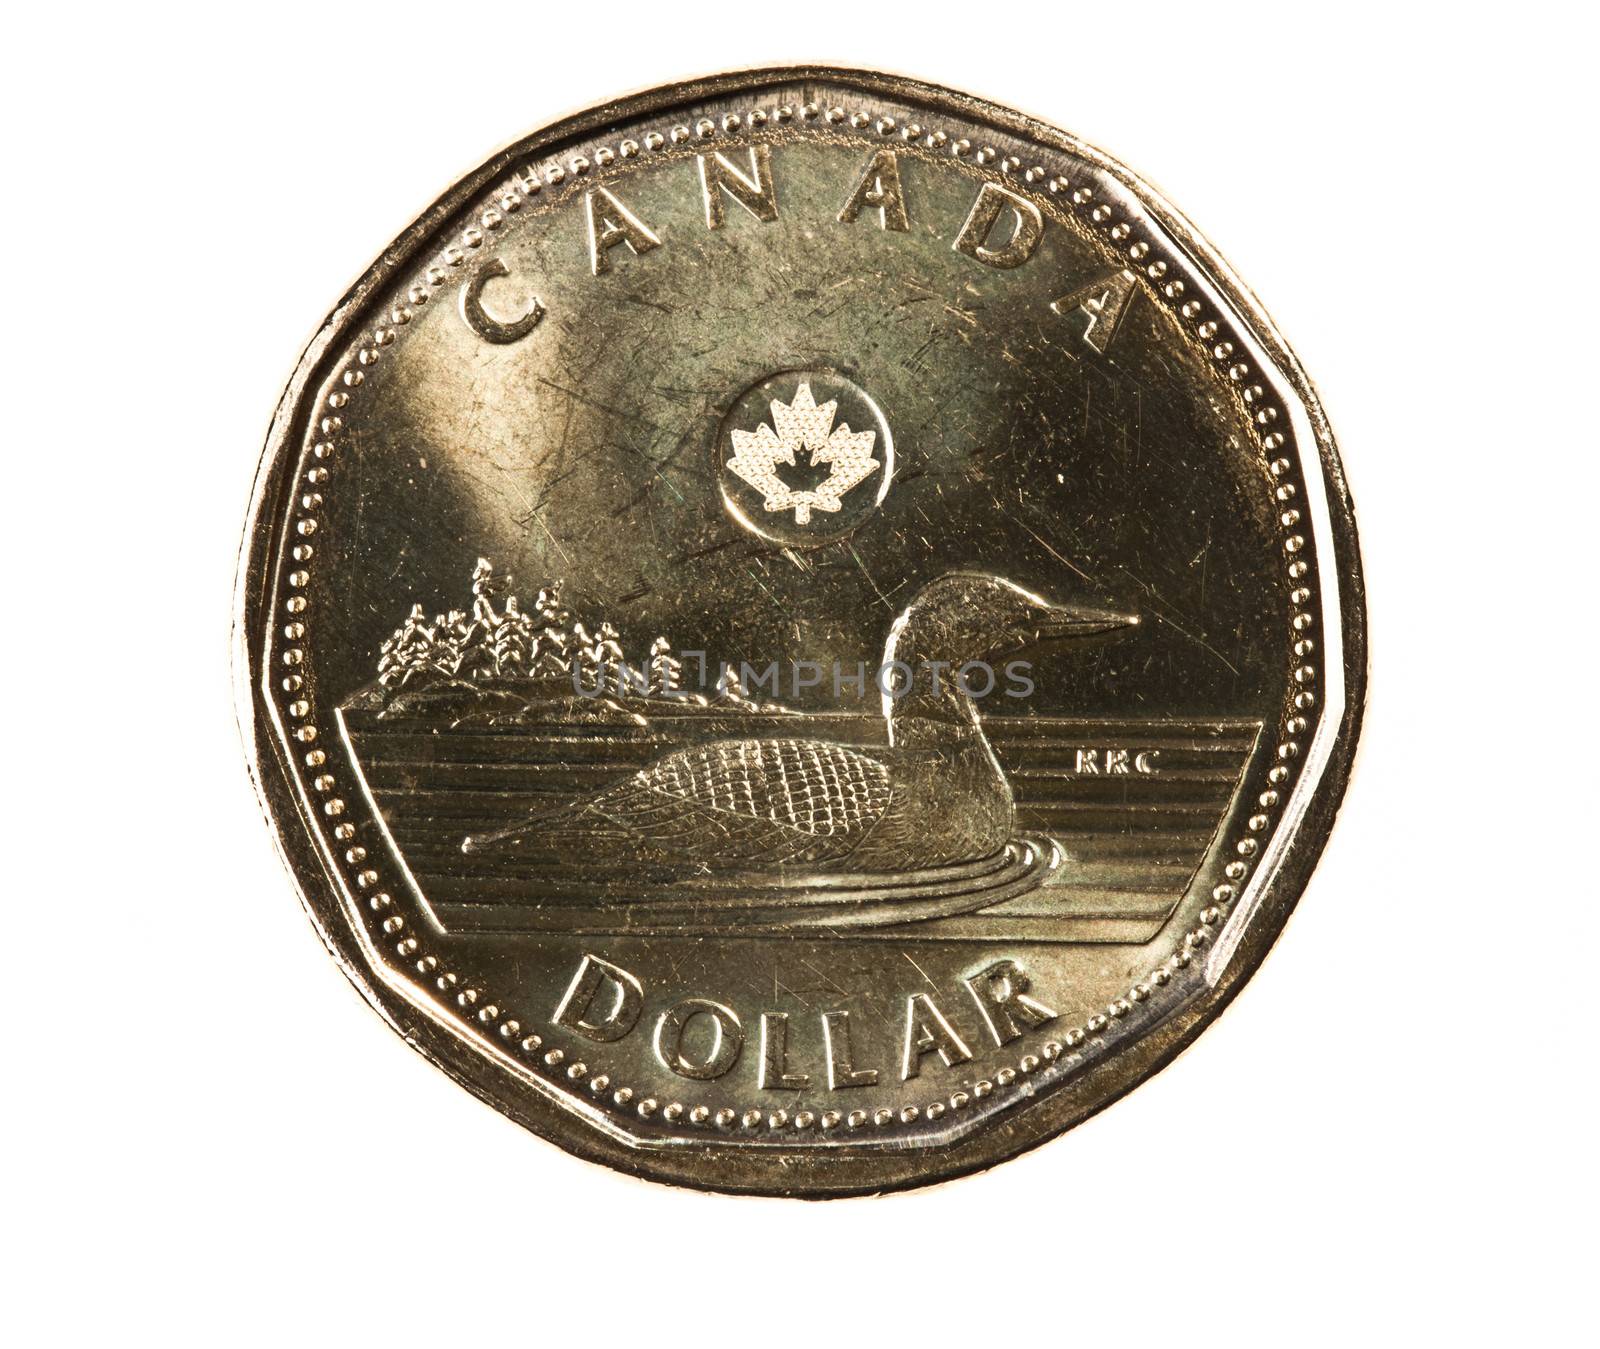 A brand new 2012 shiny Canadian dollar coin with a loonie